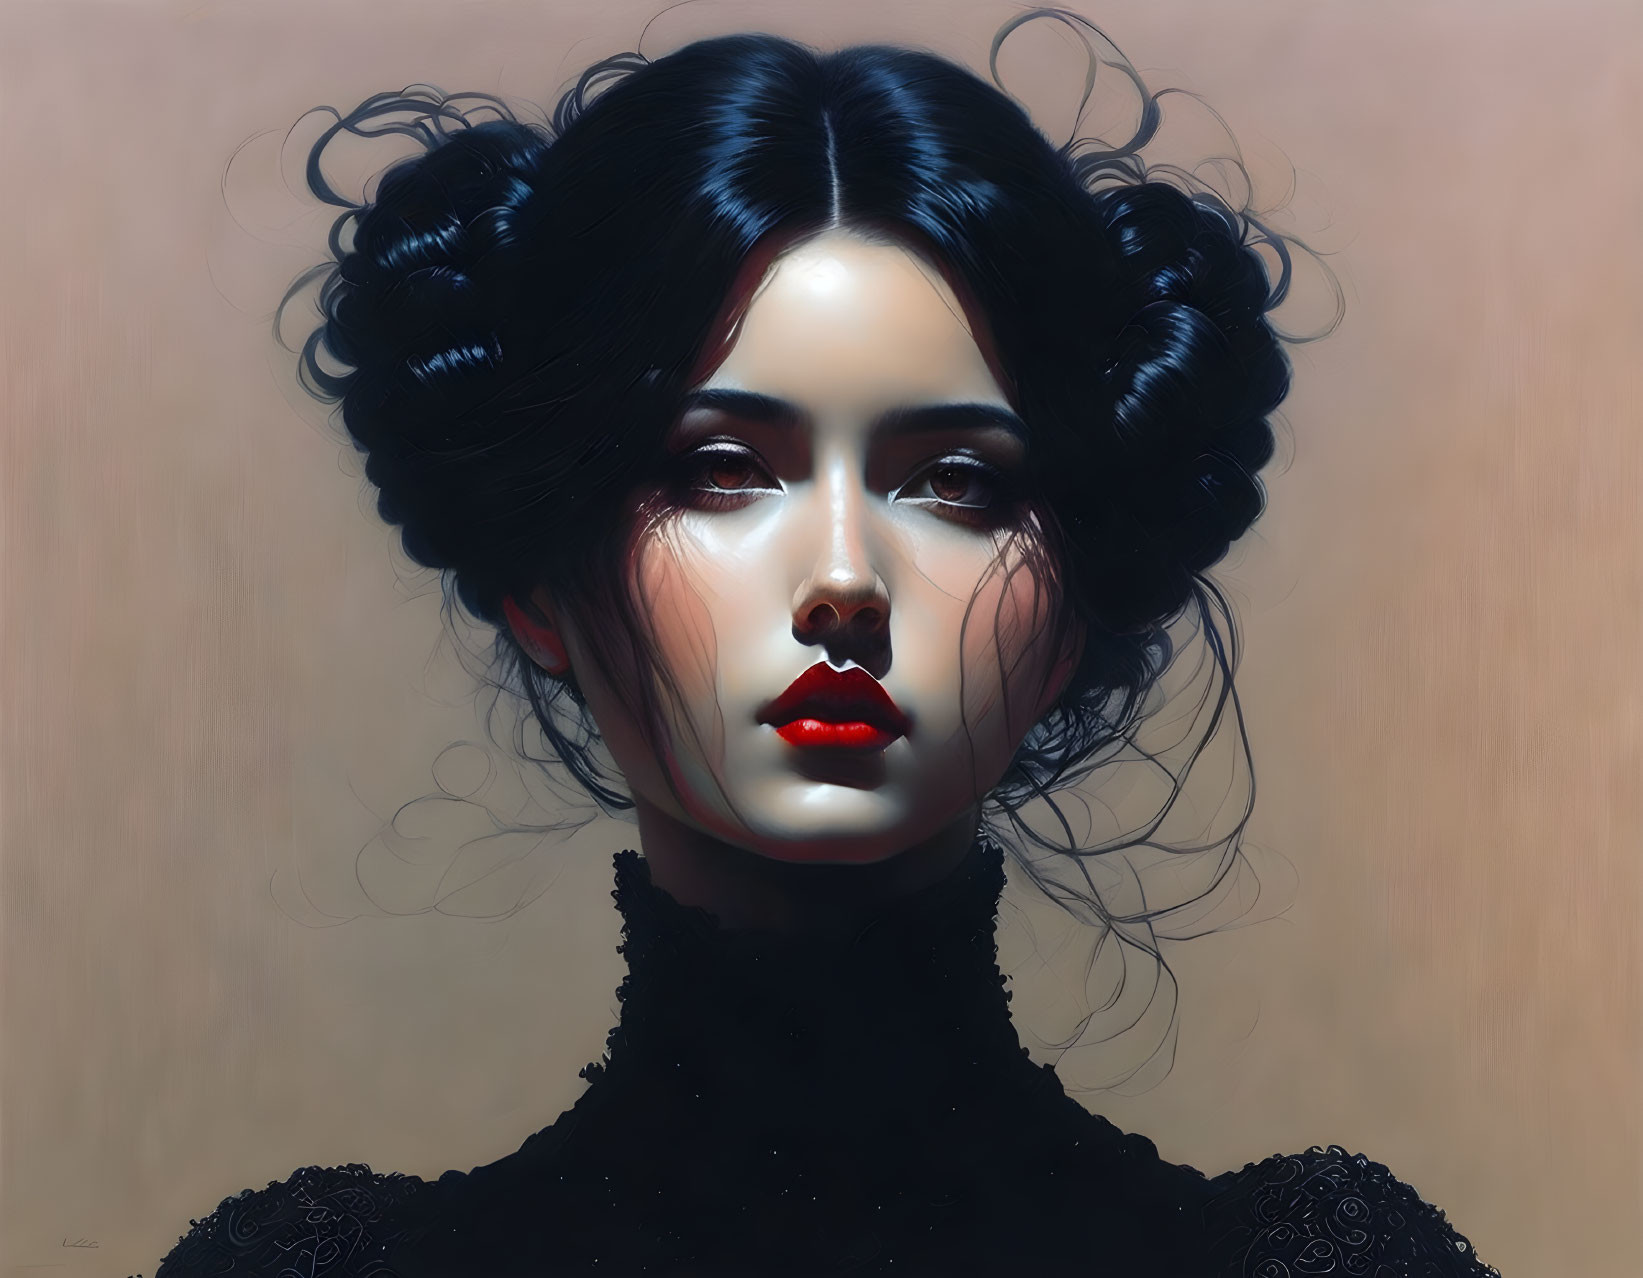 Portrait of Woman with Pale Skin, Dark Hair, Red Lips, and High-Neck Outfit